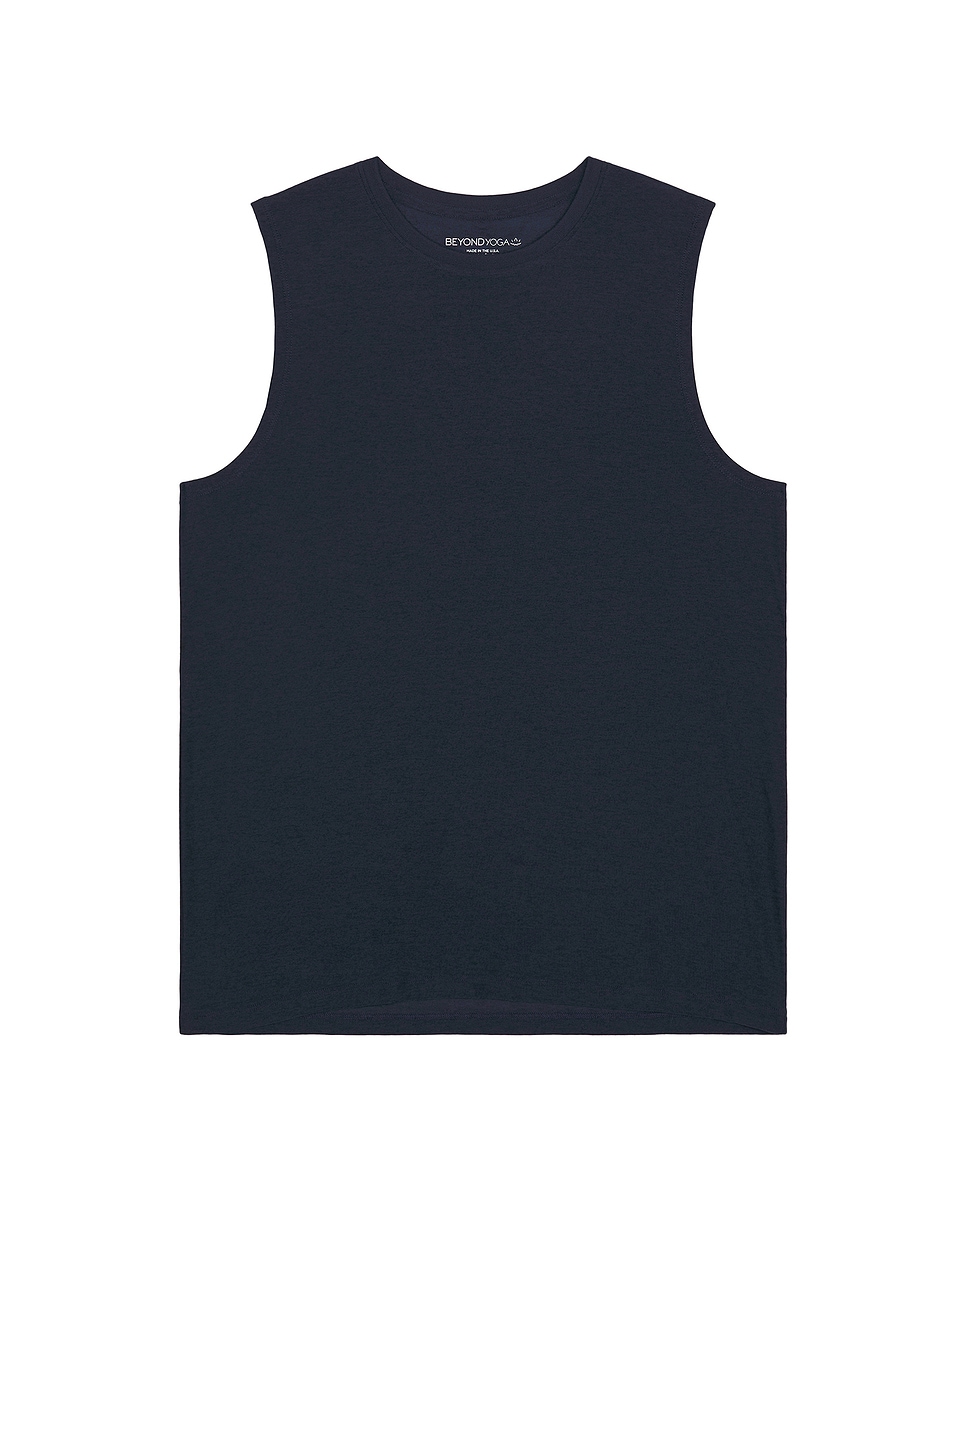 Featherweight Freeflo Muscle Tank in Navy